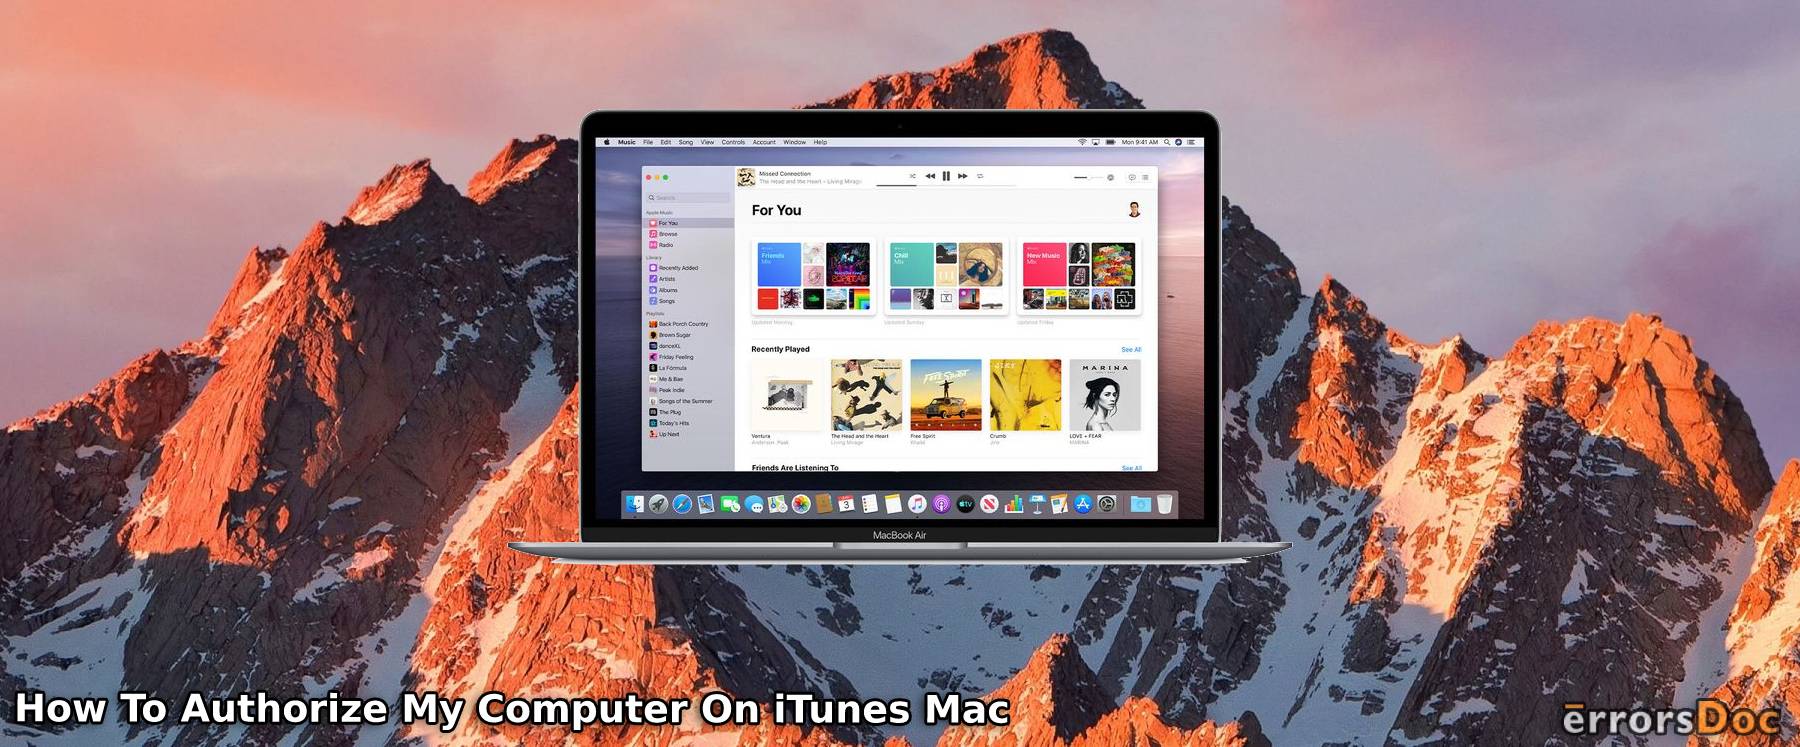 How to Authorize a Computer on iTunes on Mac, MacBook Air and Windows 10?